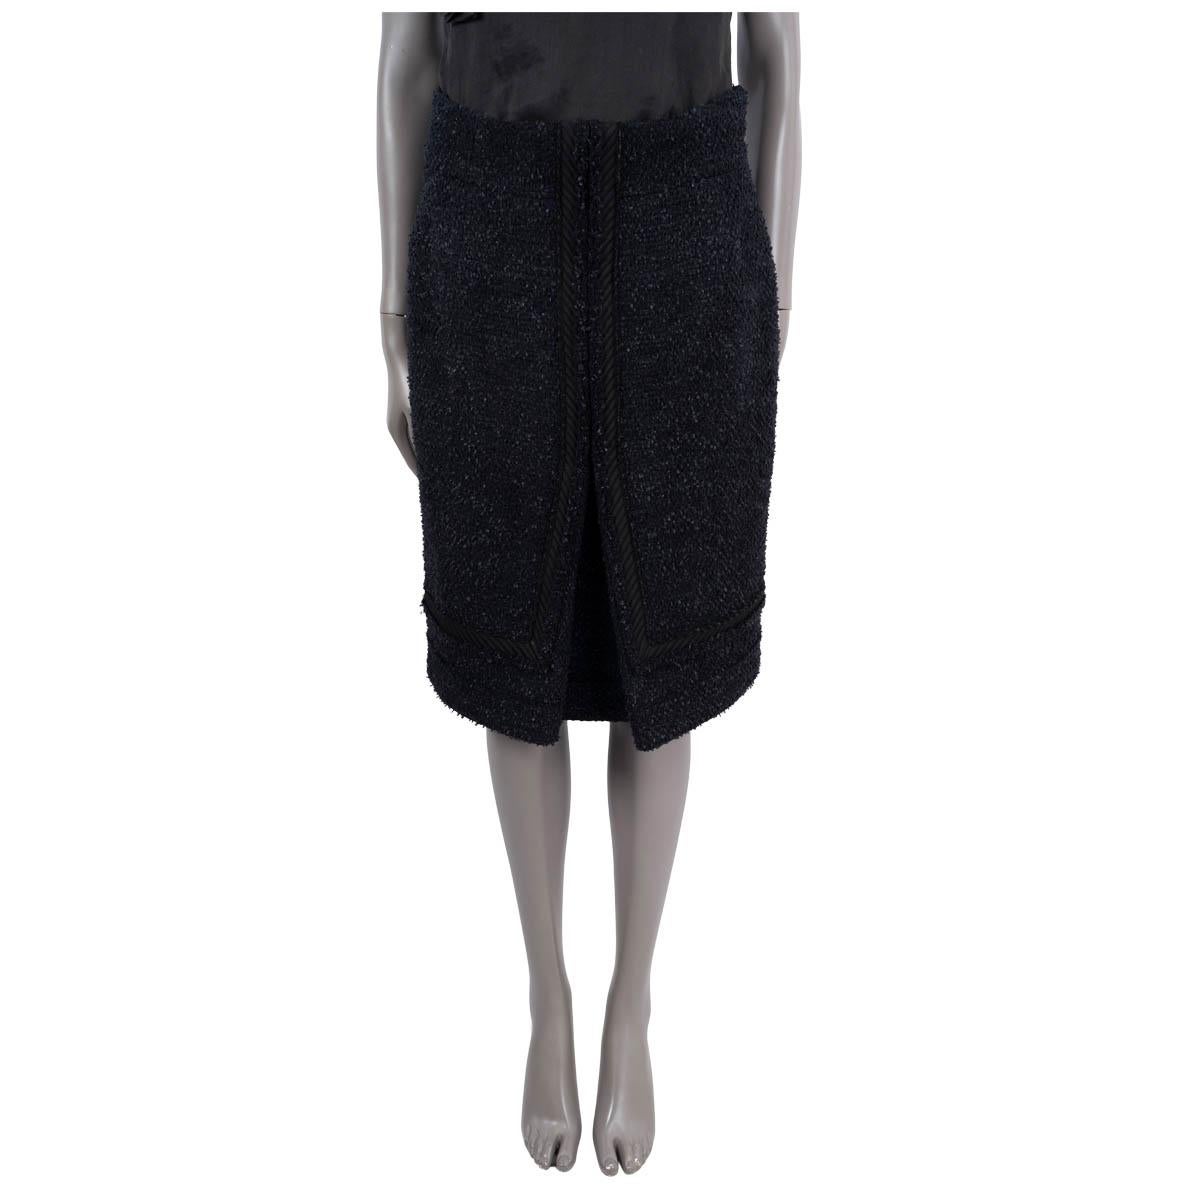 100% authentic  Chanel tweed skirt in black and navy blue wool (80%) and nylon (20%). Features a quilted trim and a logo button at the waist. Closes with a concealed zipper in the back and is lined in silk (86%) and spandex (14%). Has been worn and